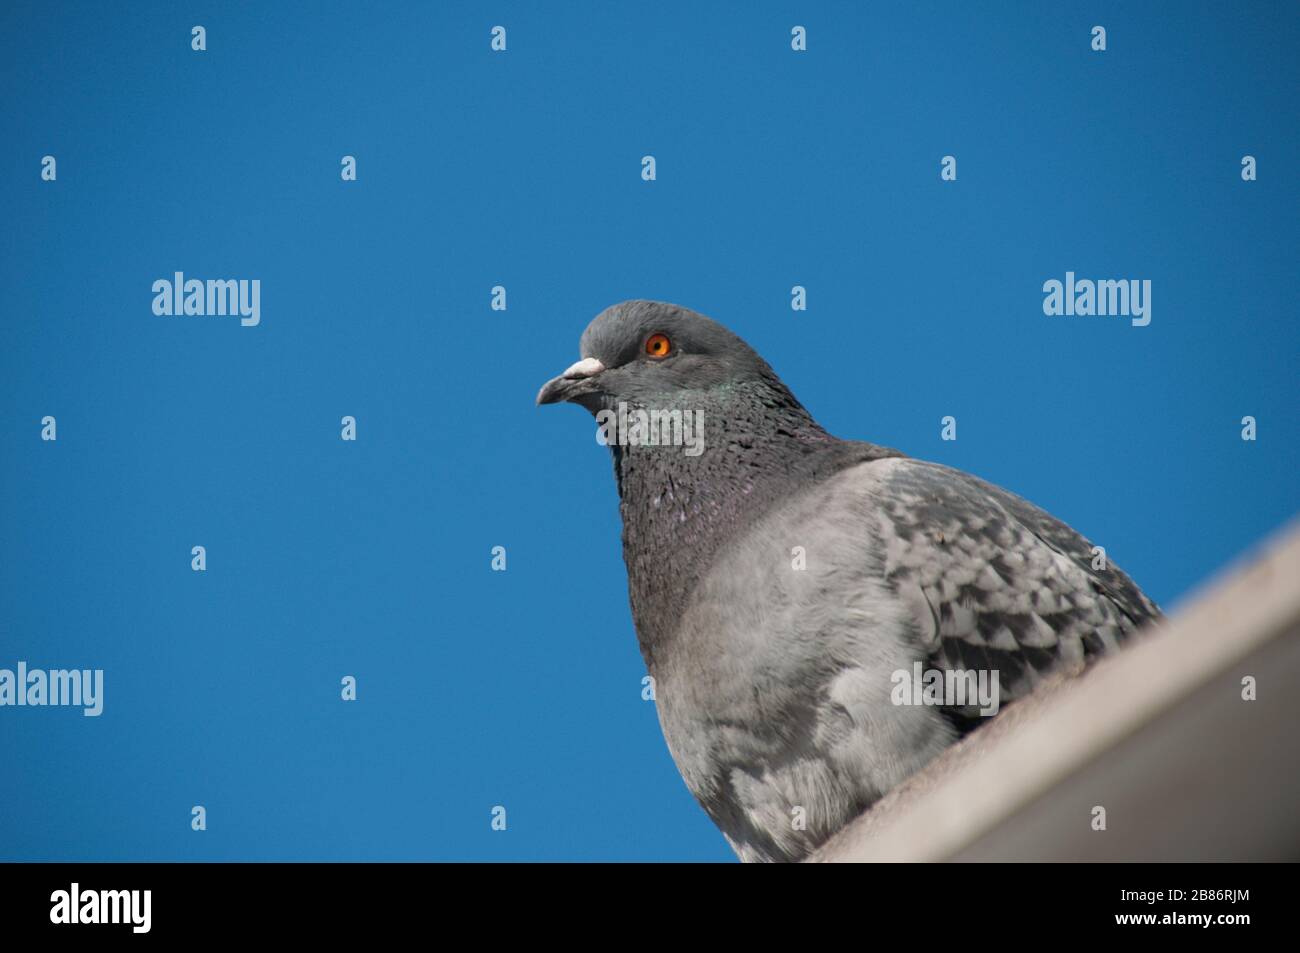 A pigeon sitting on the roof. Close-up view with a bright blue sky in the background. Stock Photo